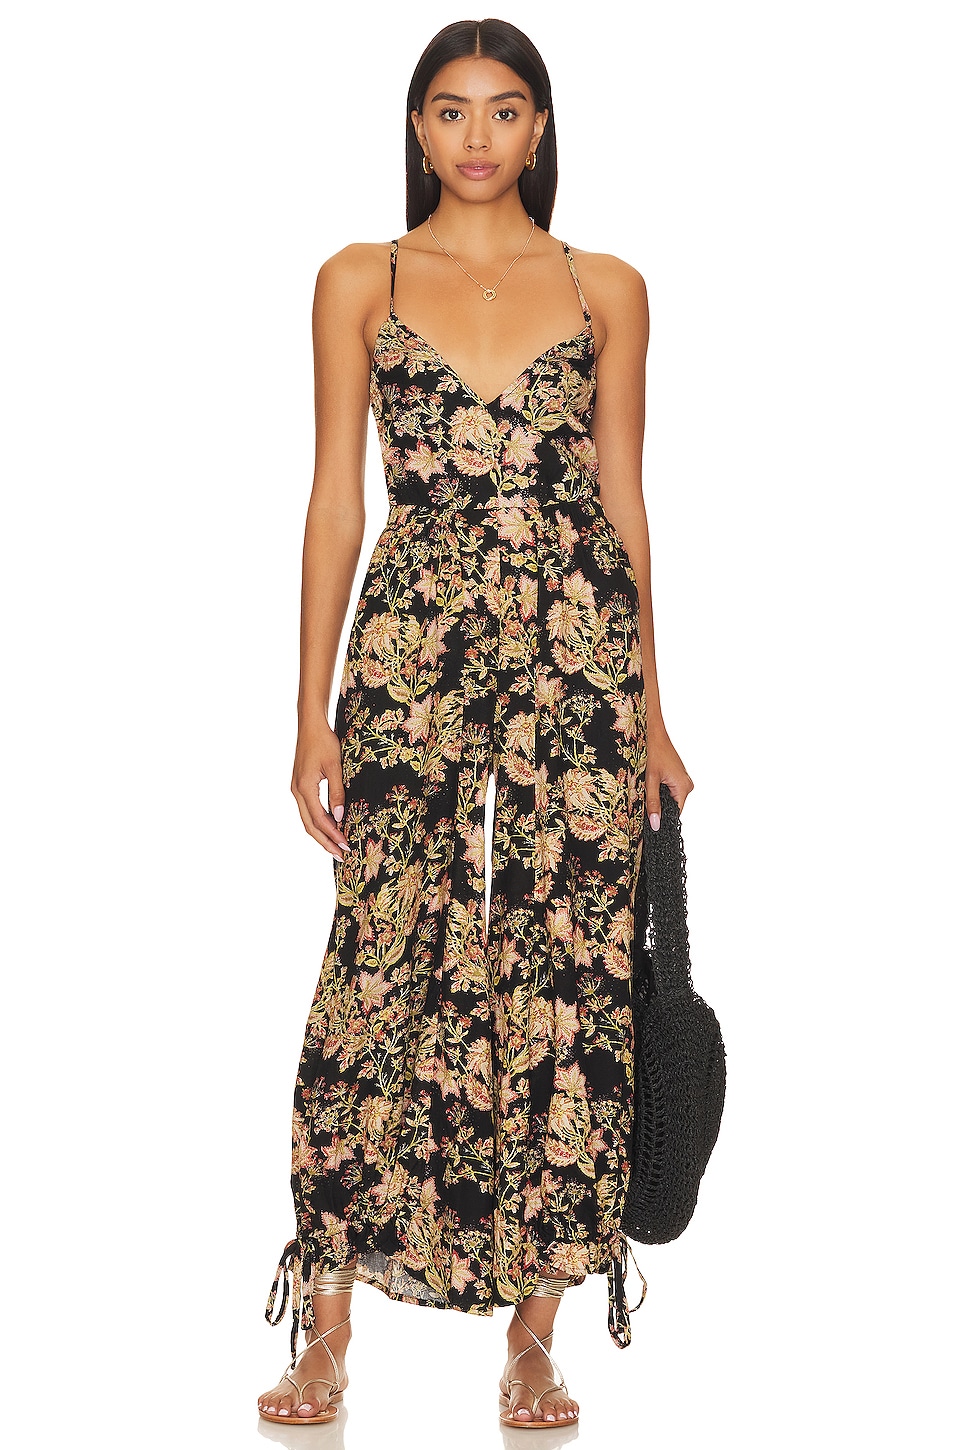 Free People x Intimately FP Suddenly Fine Maxi Slip in Black Combo